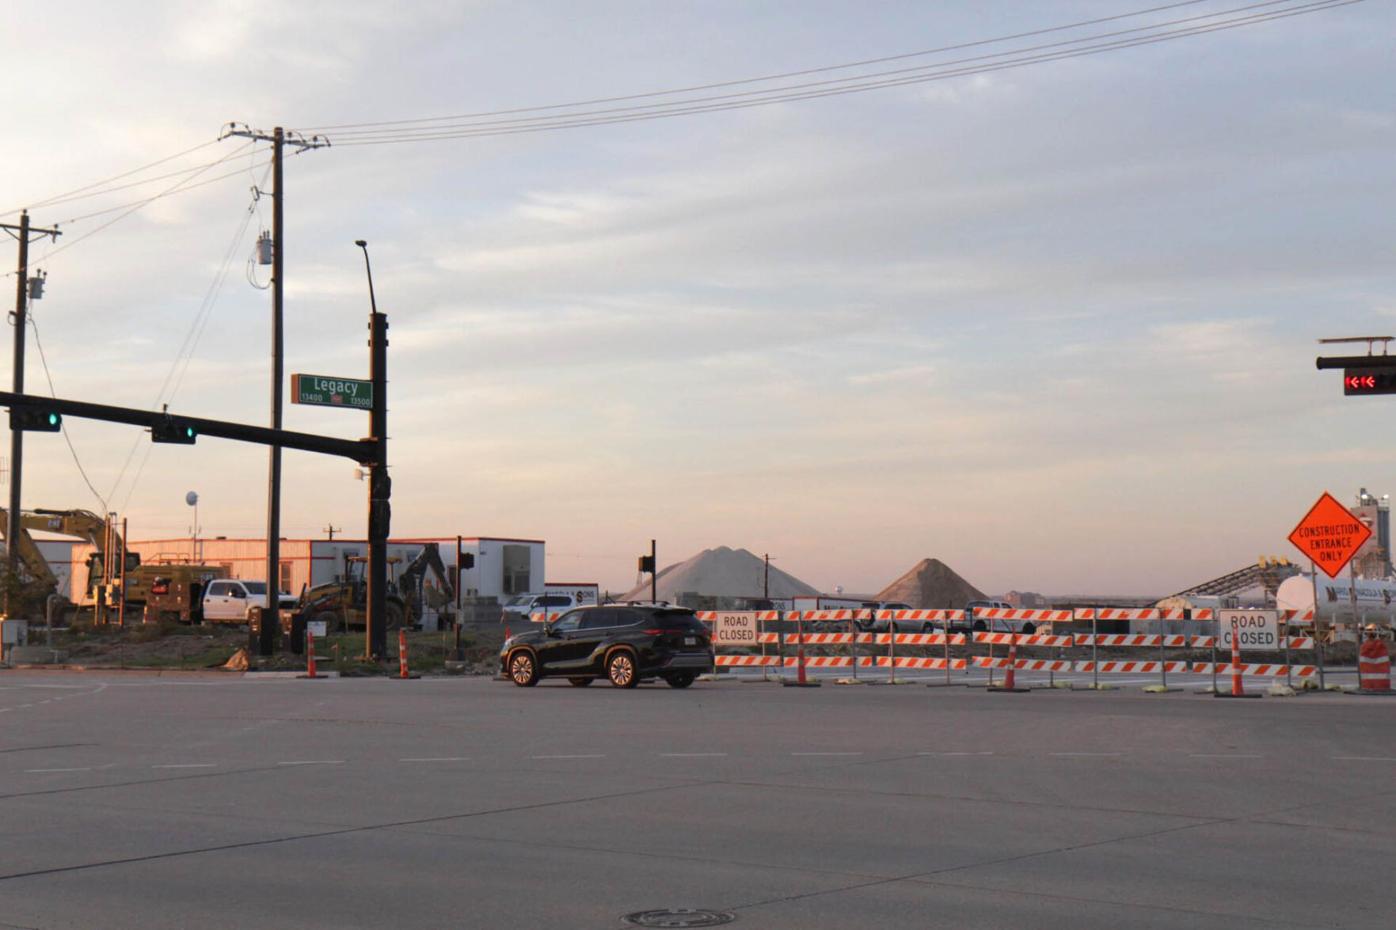 Here's a look ahead at the future of Legacy Drive in Frisco